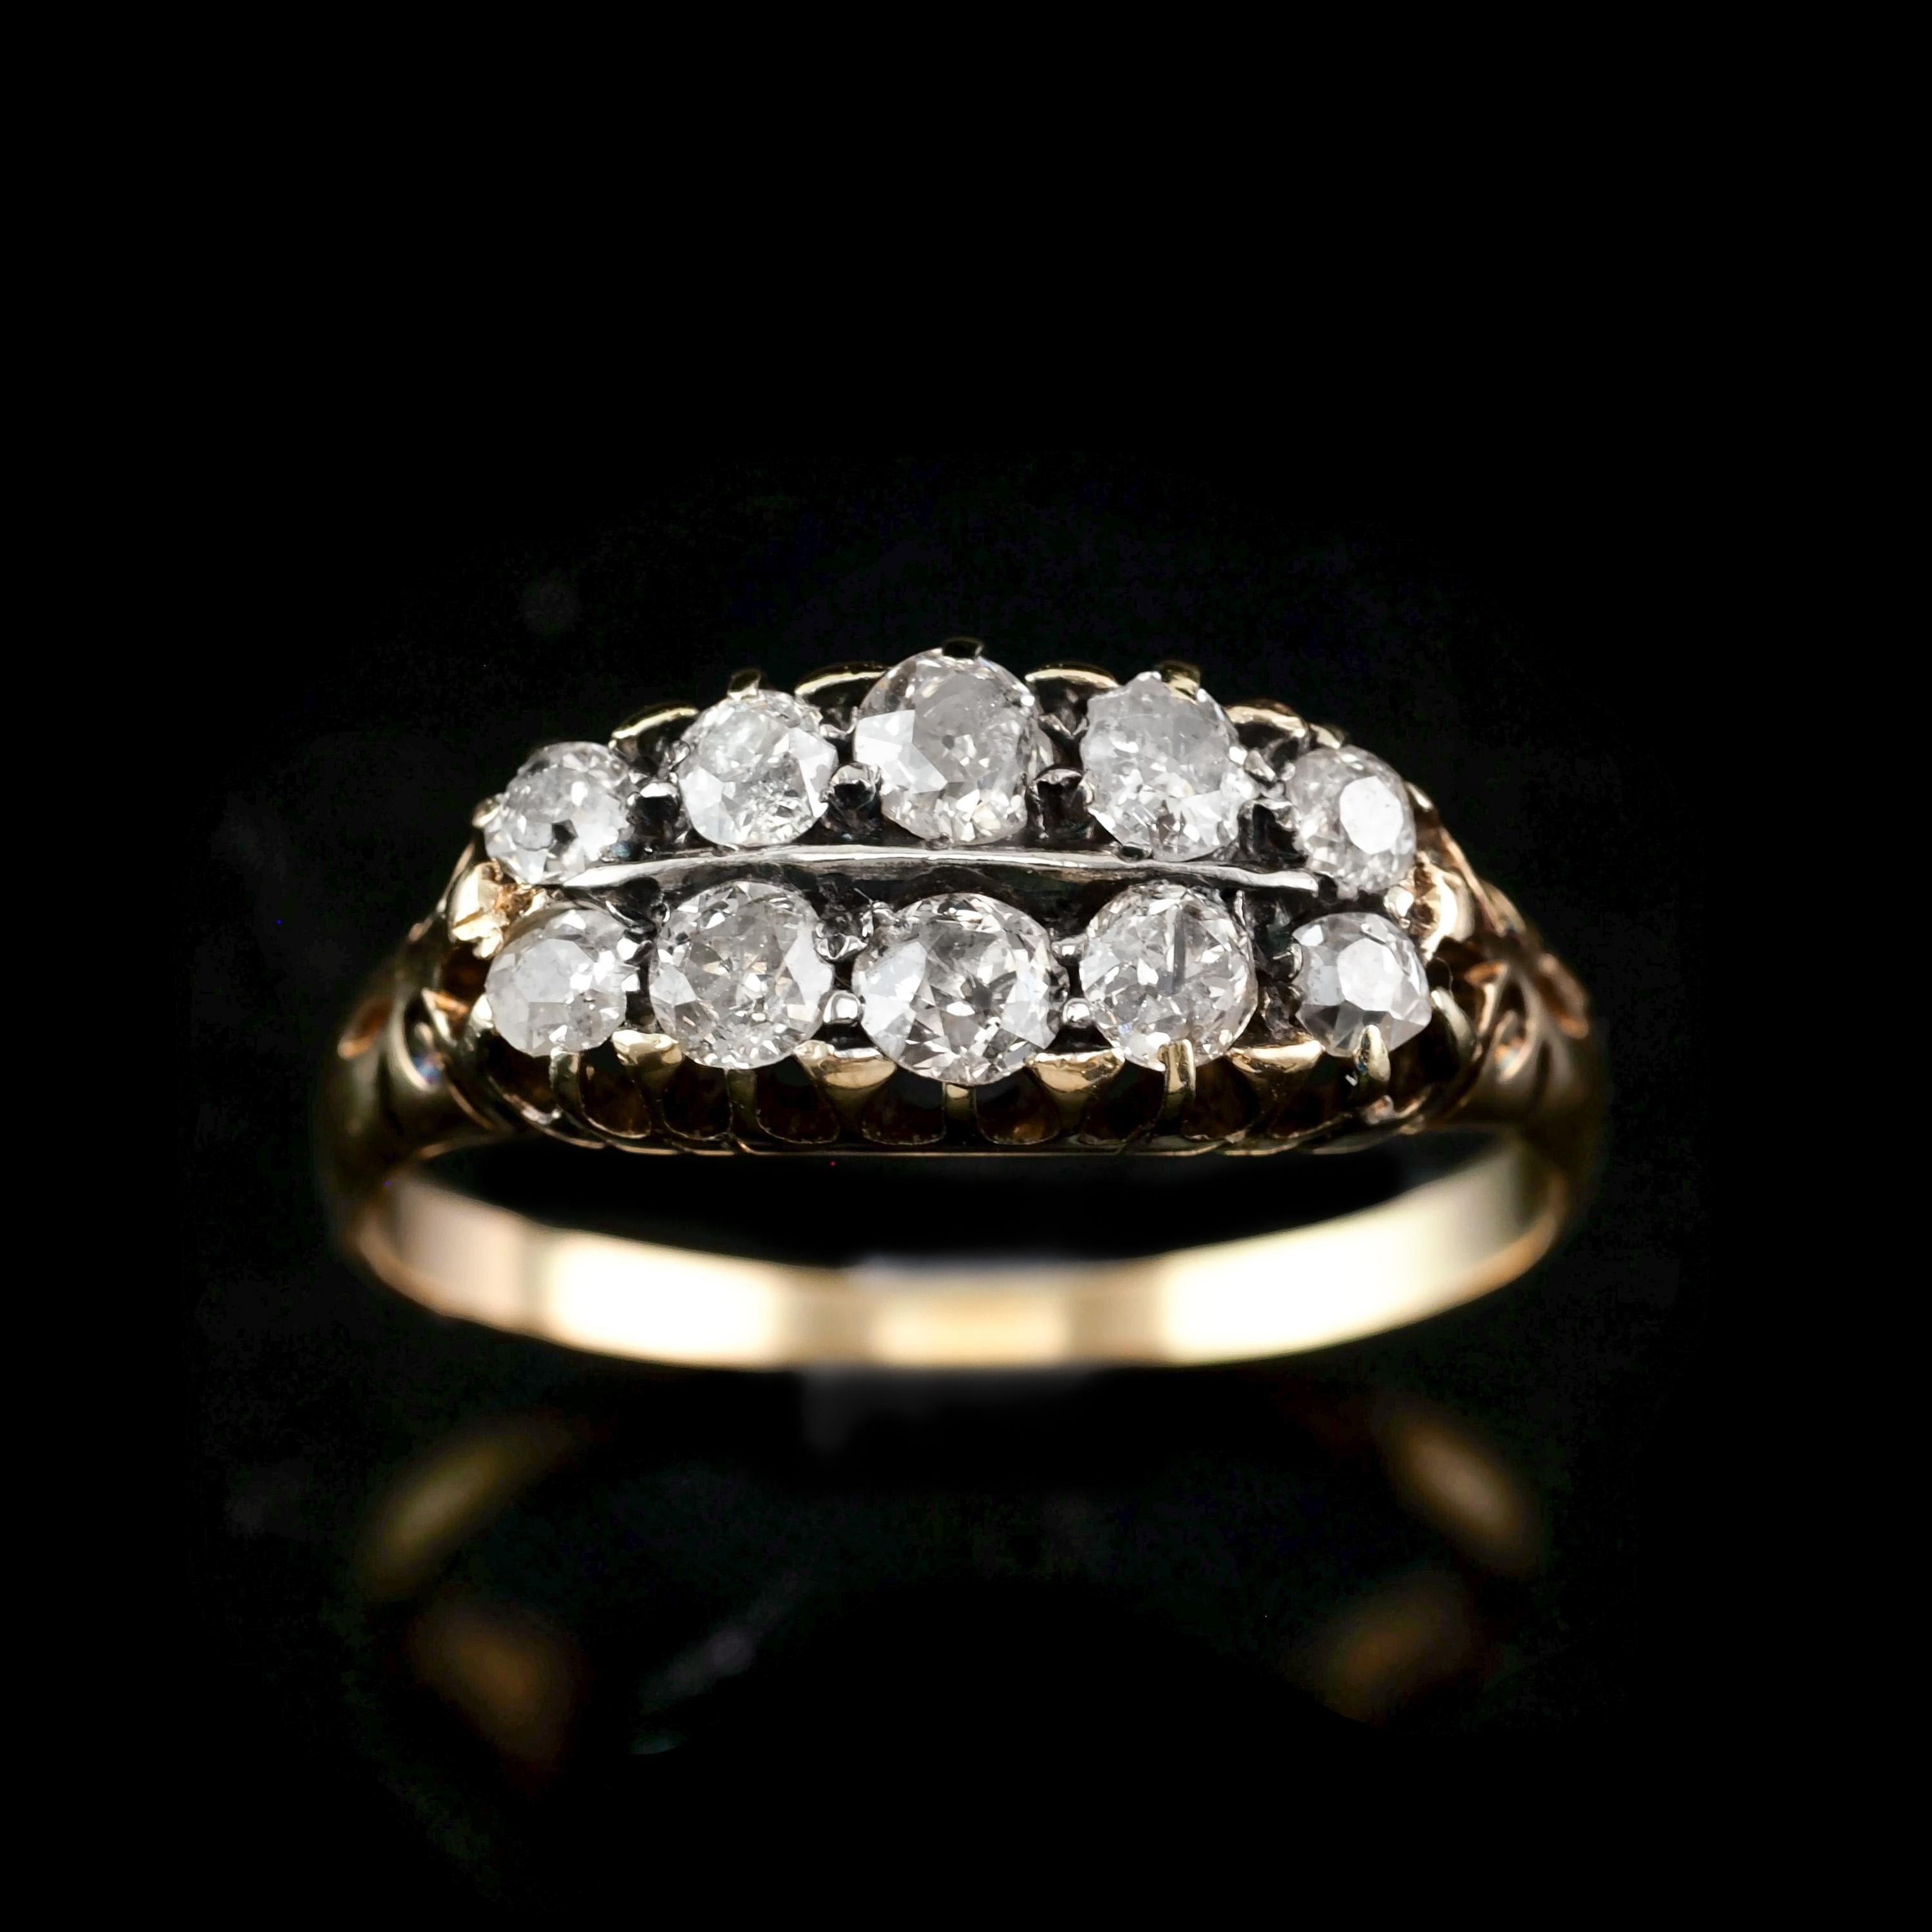 Antique Victorian 18K Gold Diamond Ring Old Cut - Boat Shaped c.1890 For Sale 6